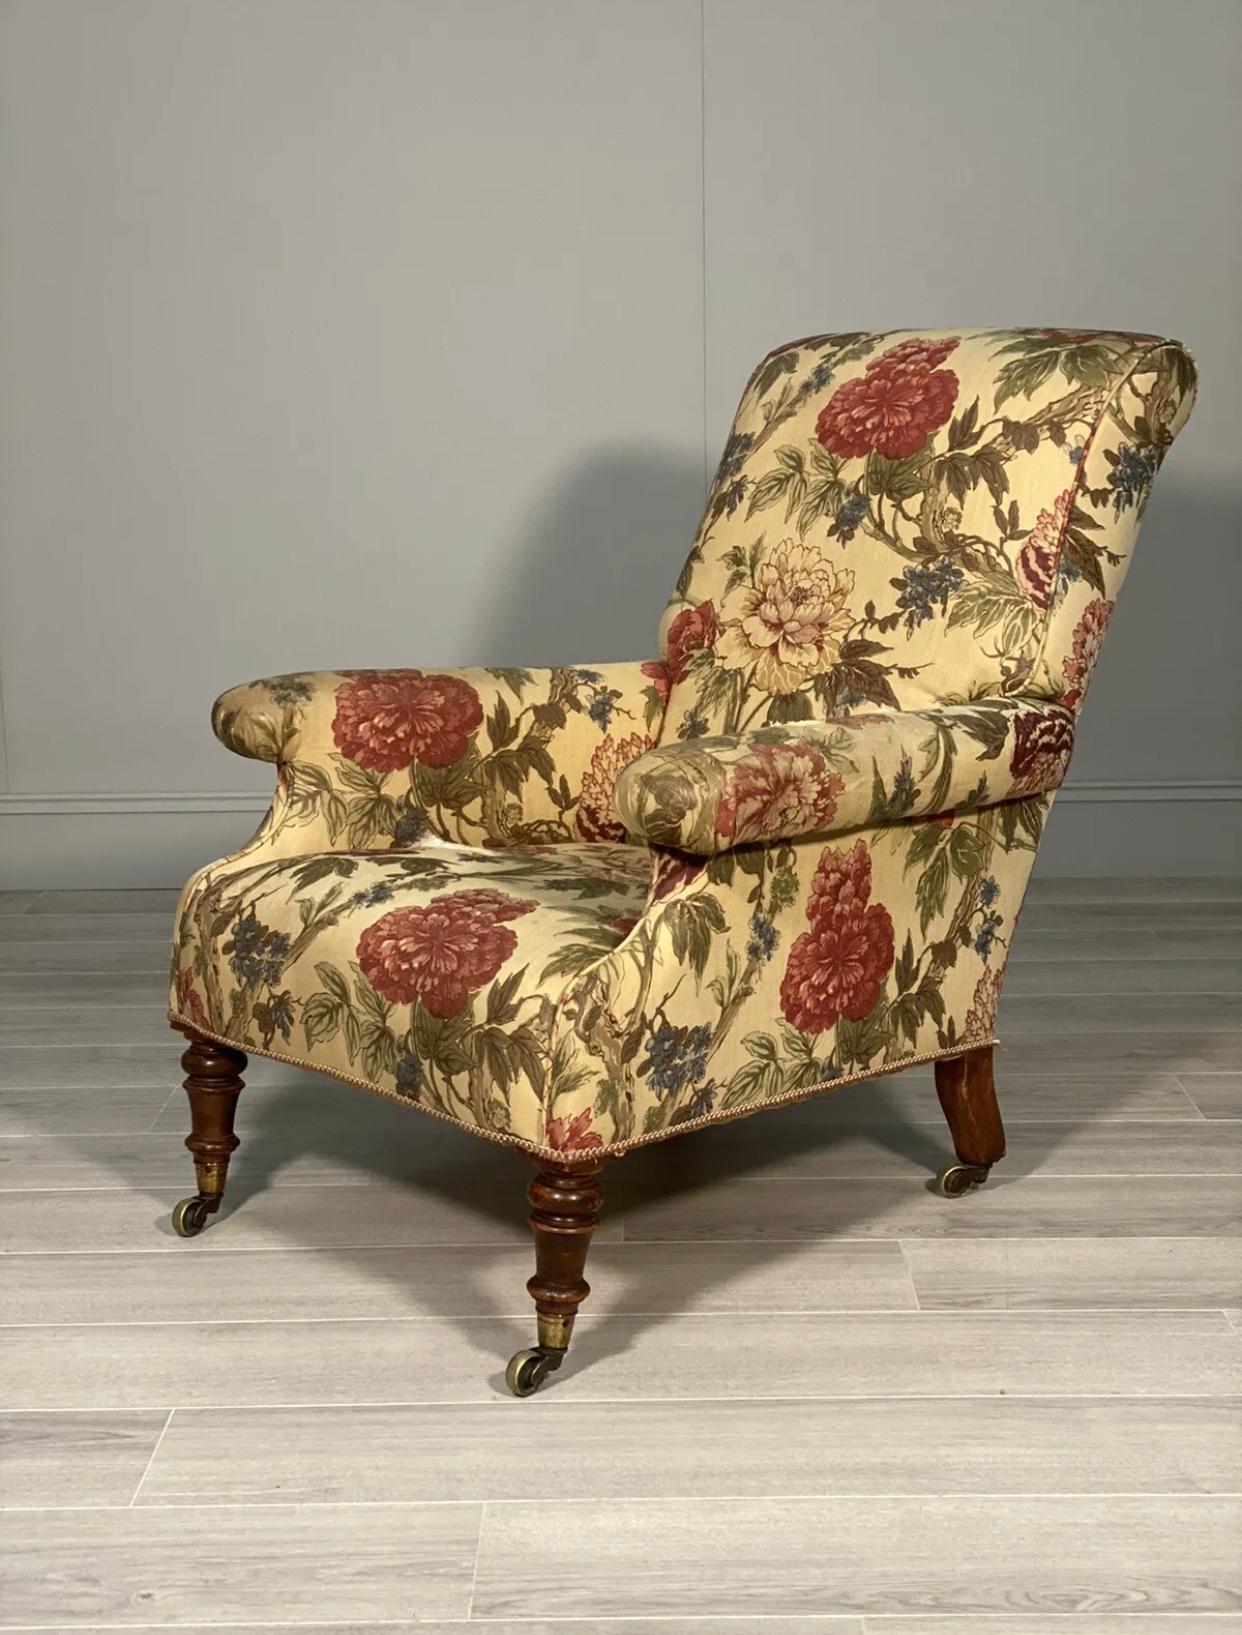 Late 19th Century 19th Century Howard Style Willoughby Armchair With Cope Castors For Sale